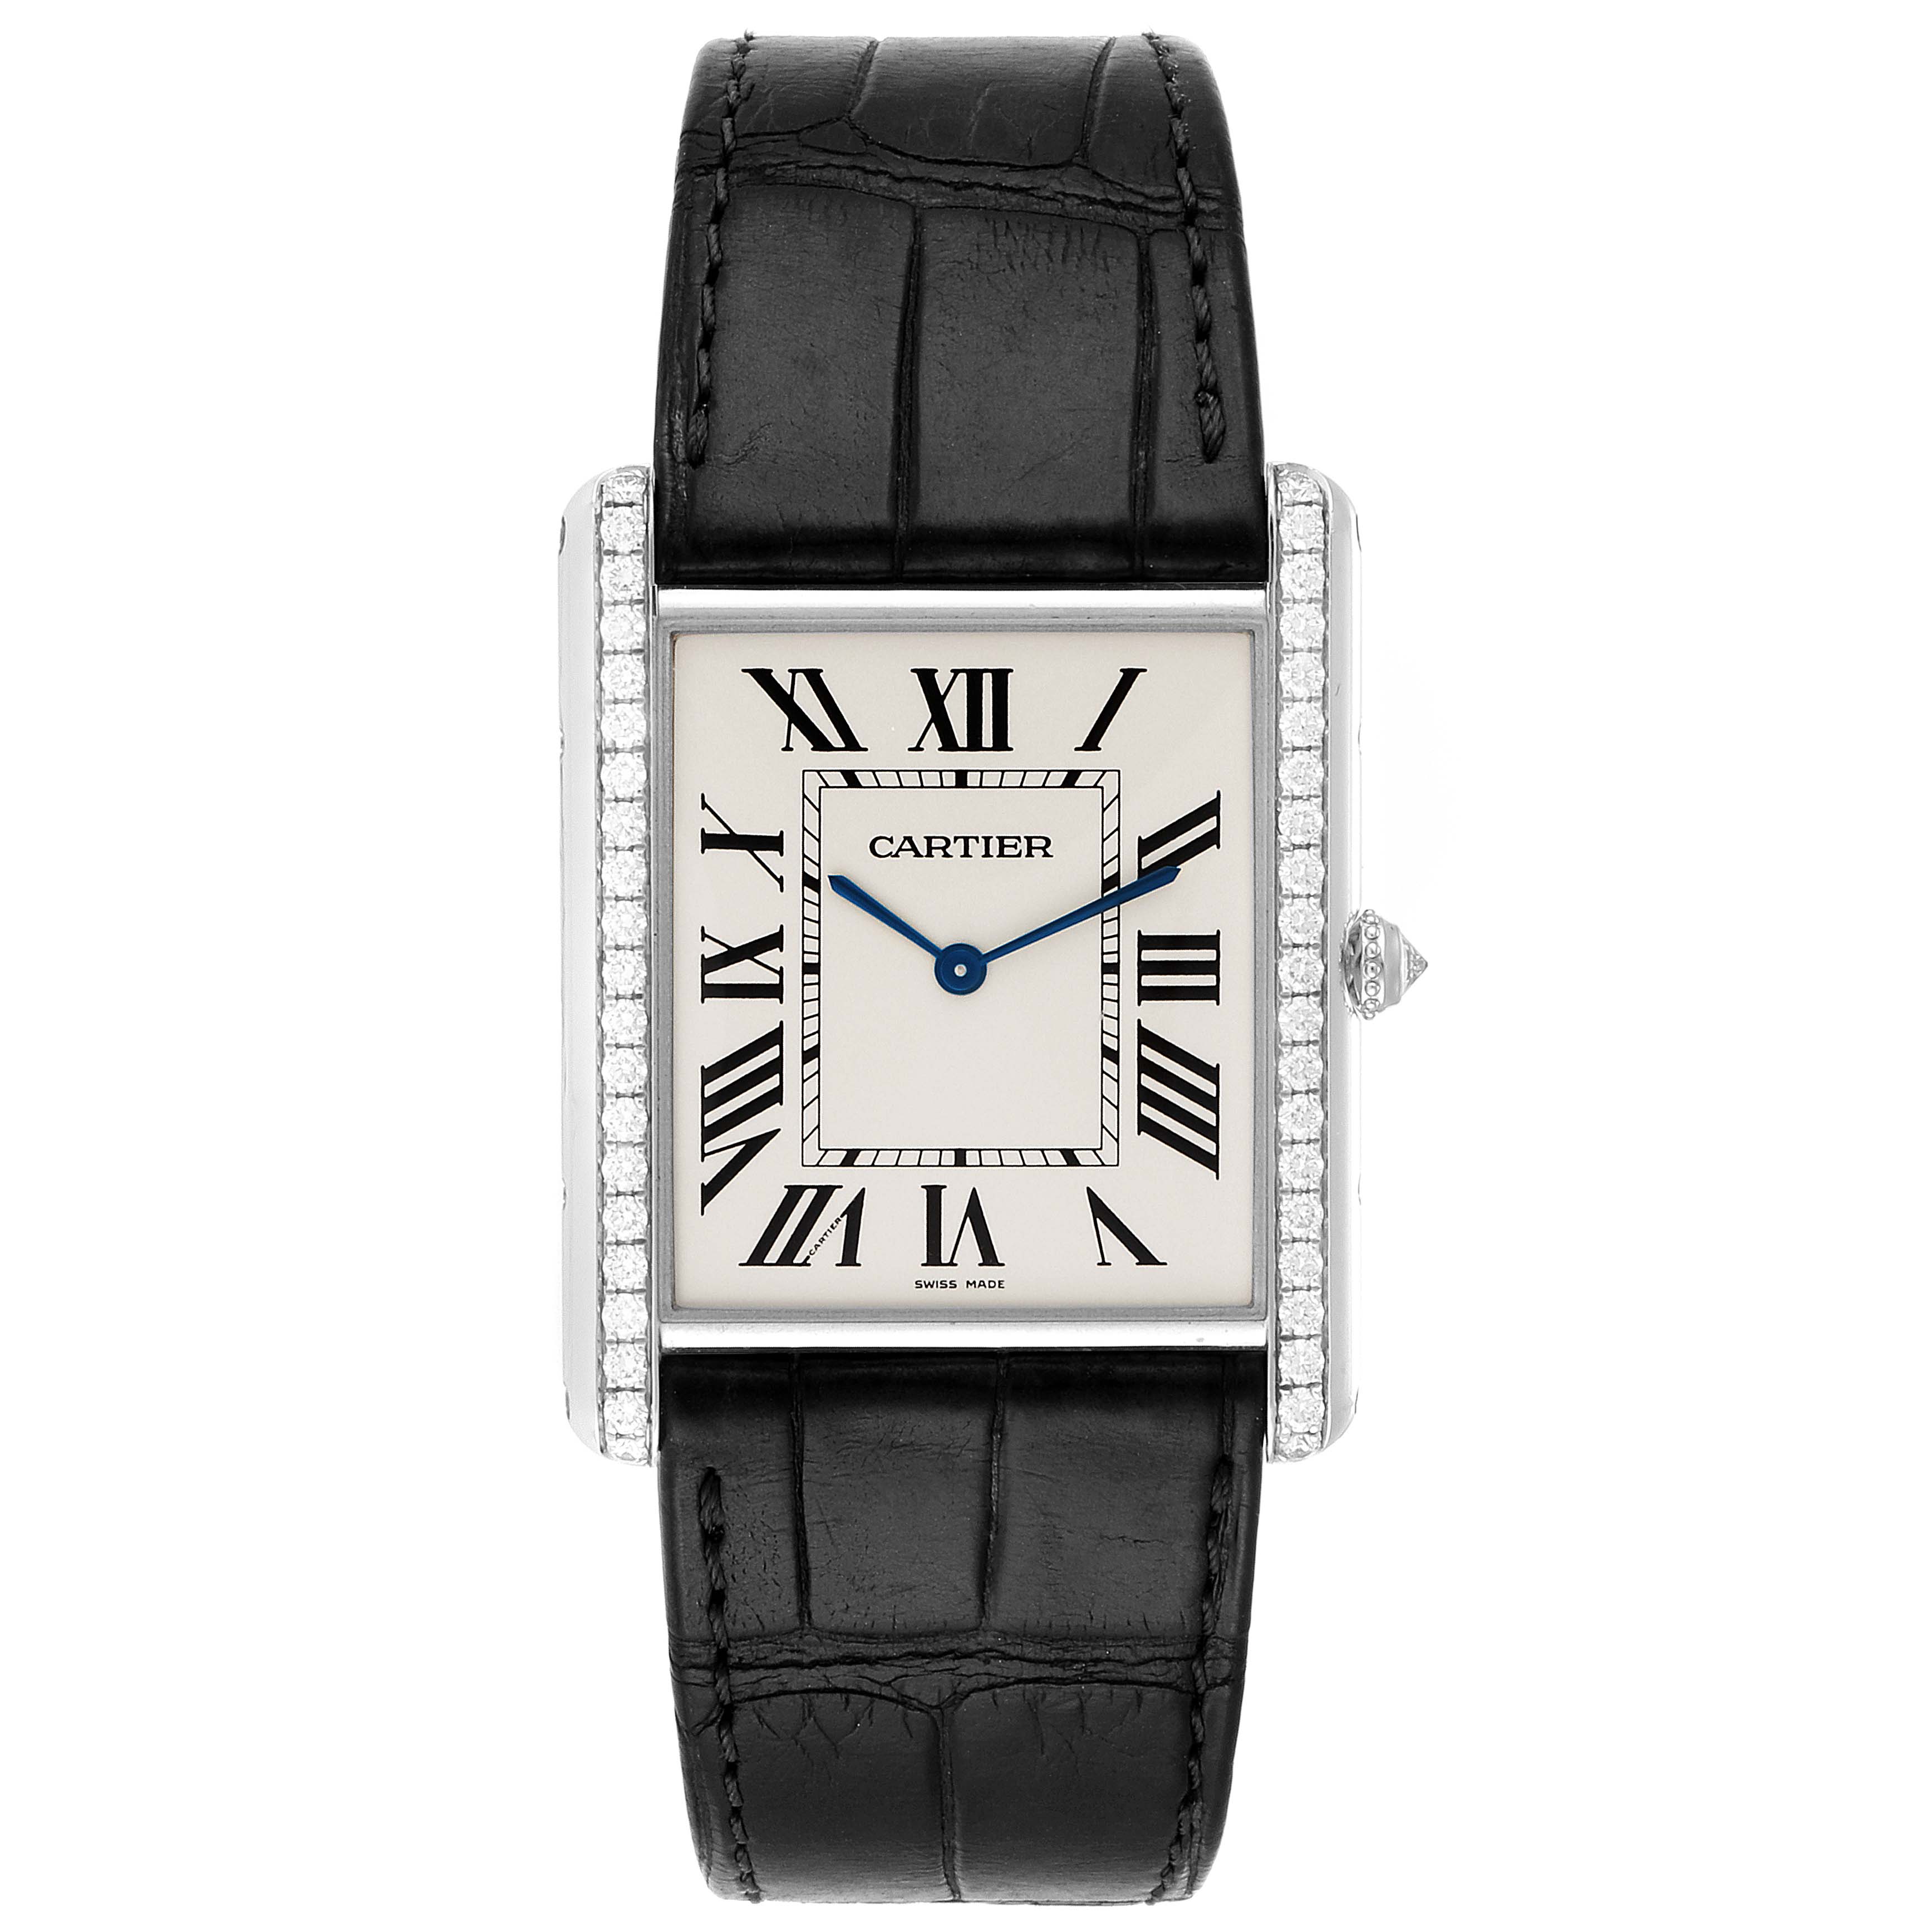 cartier watch papers